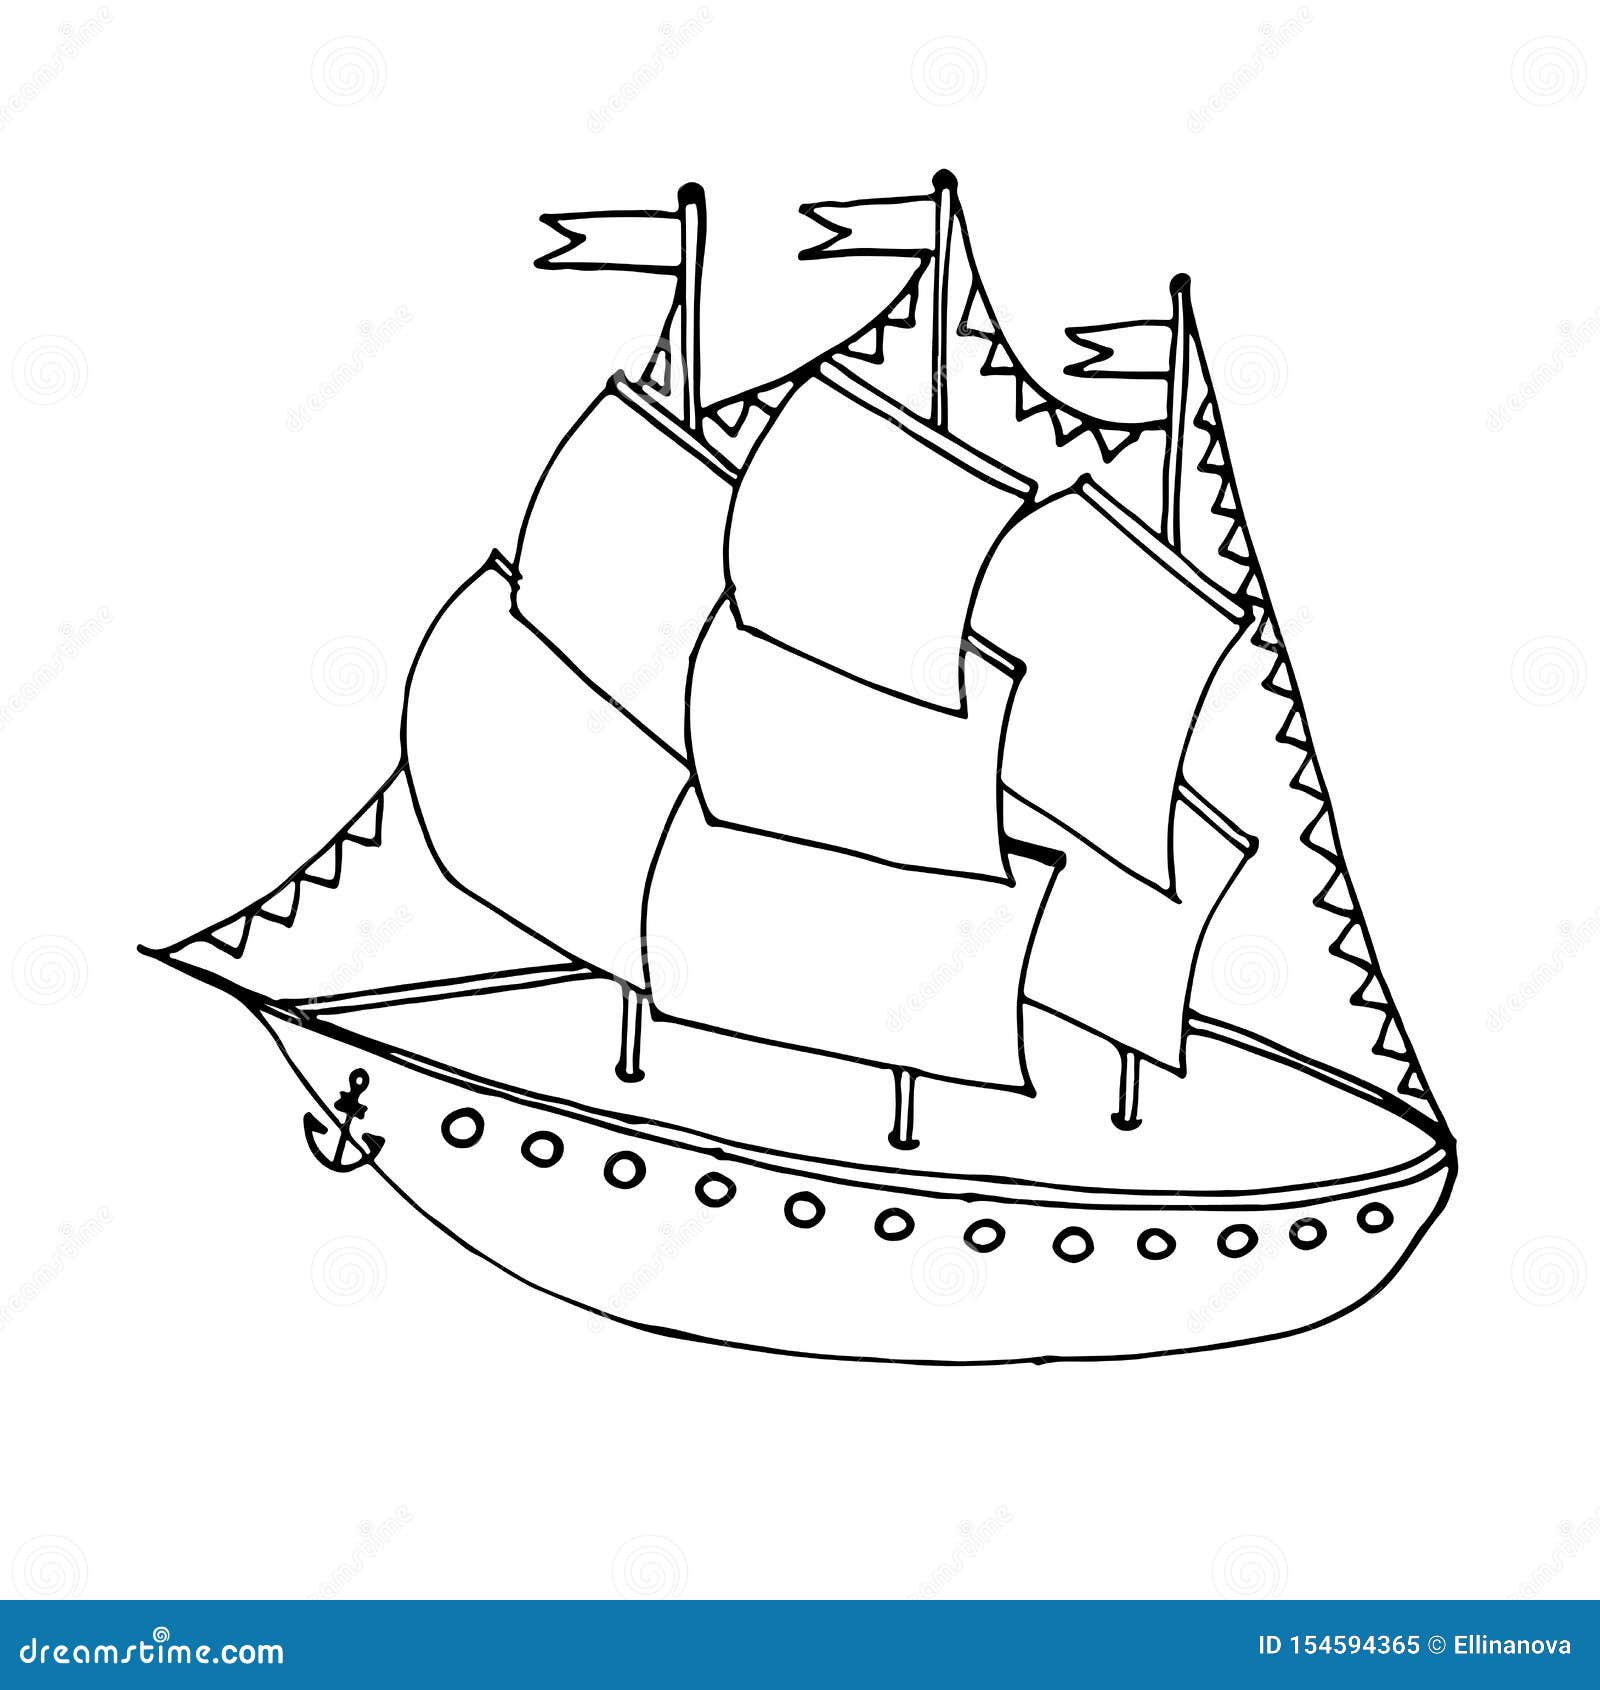 Black Line Ship or Boat for Coloring Book Stock Vector ...